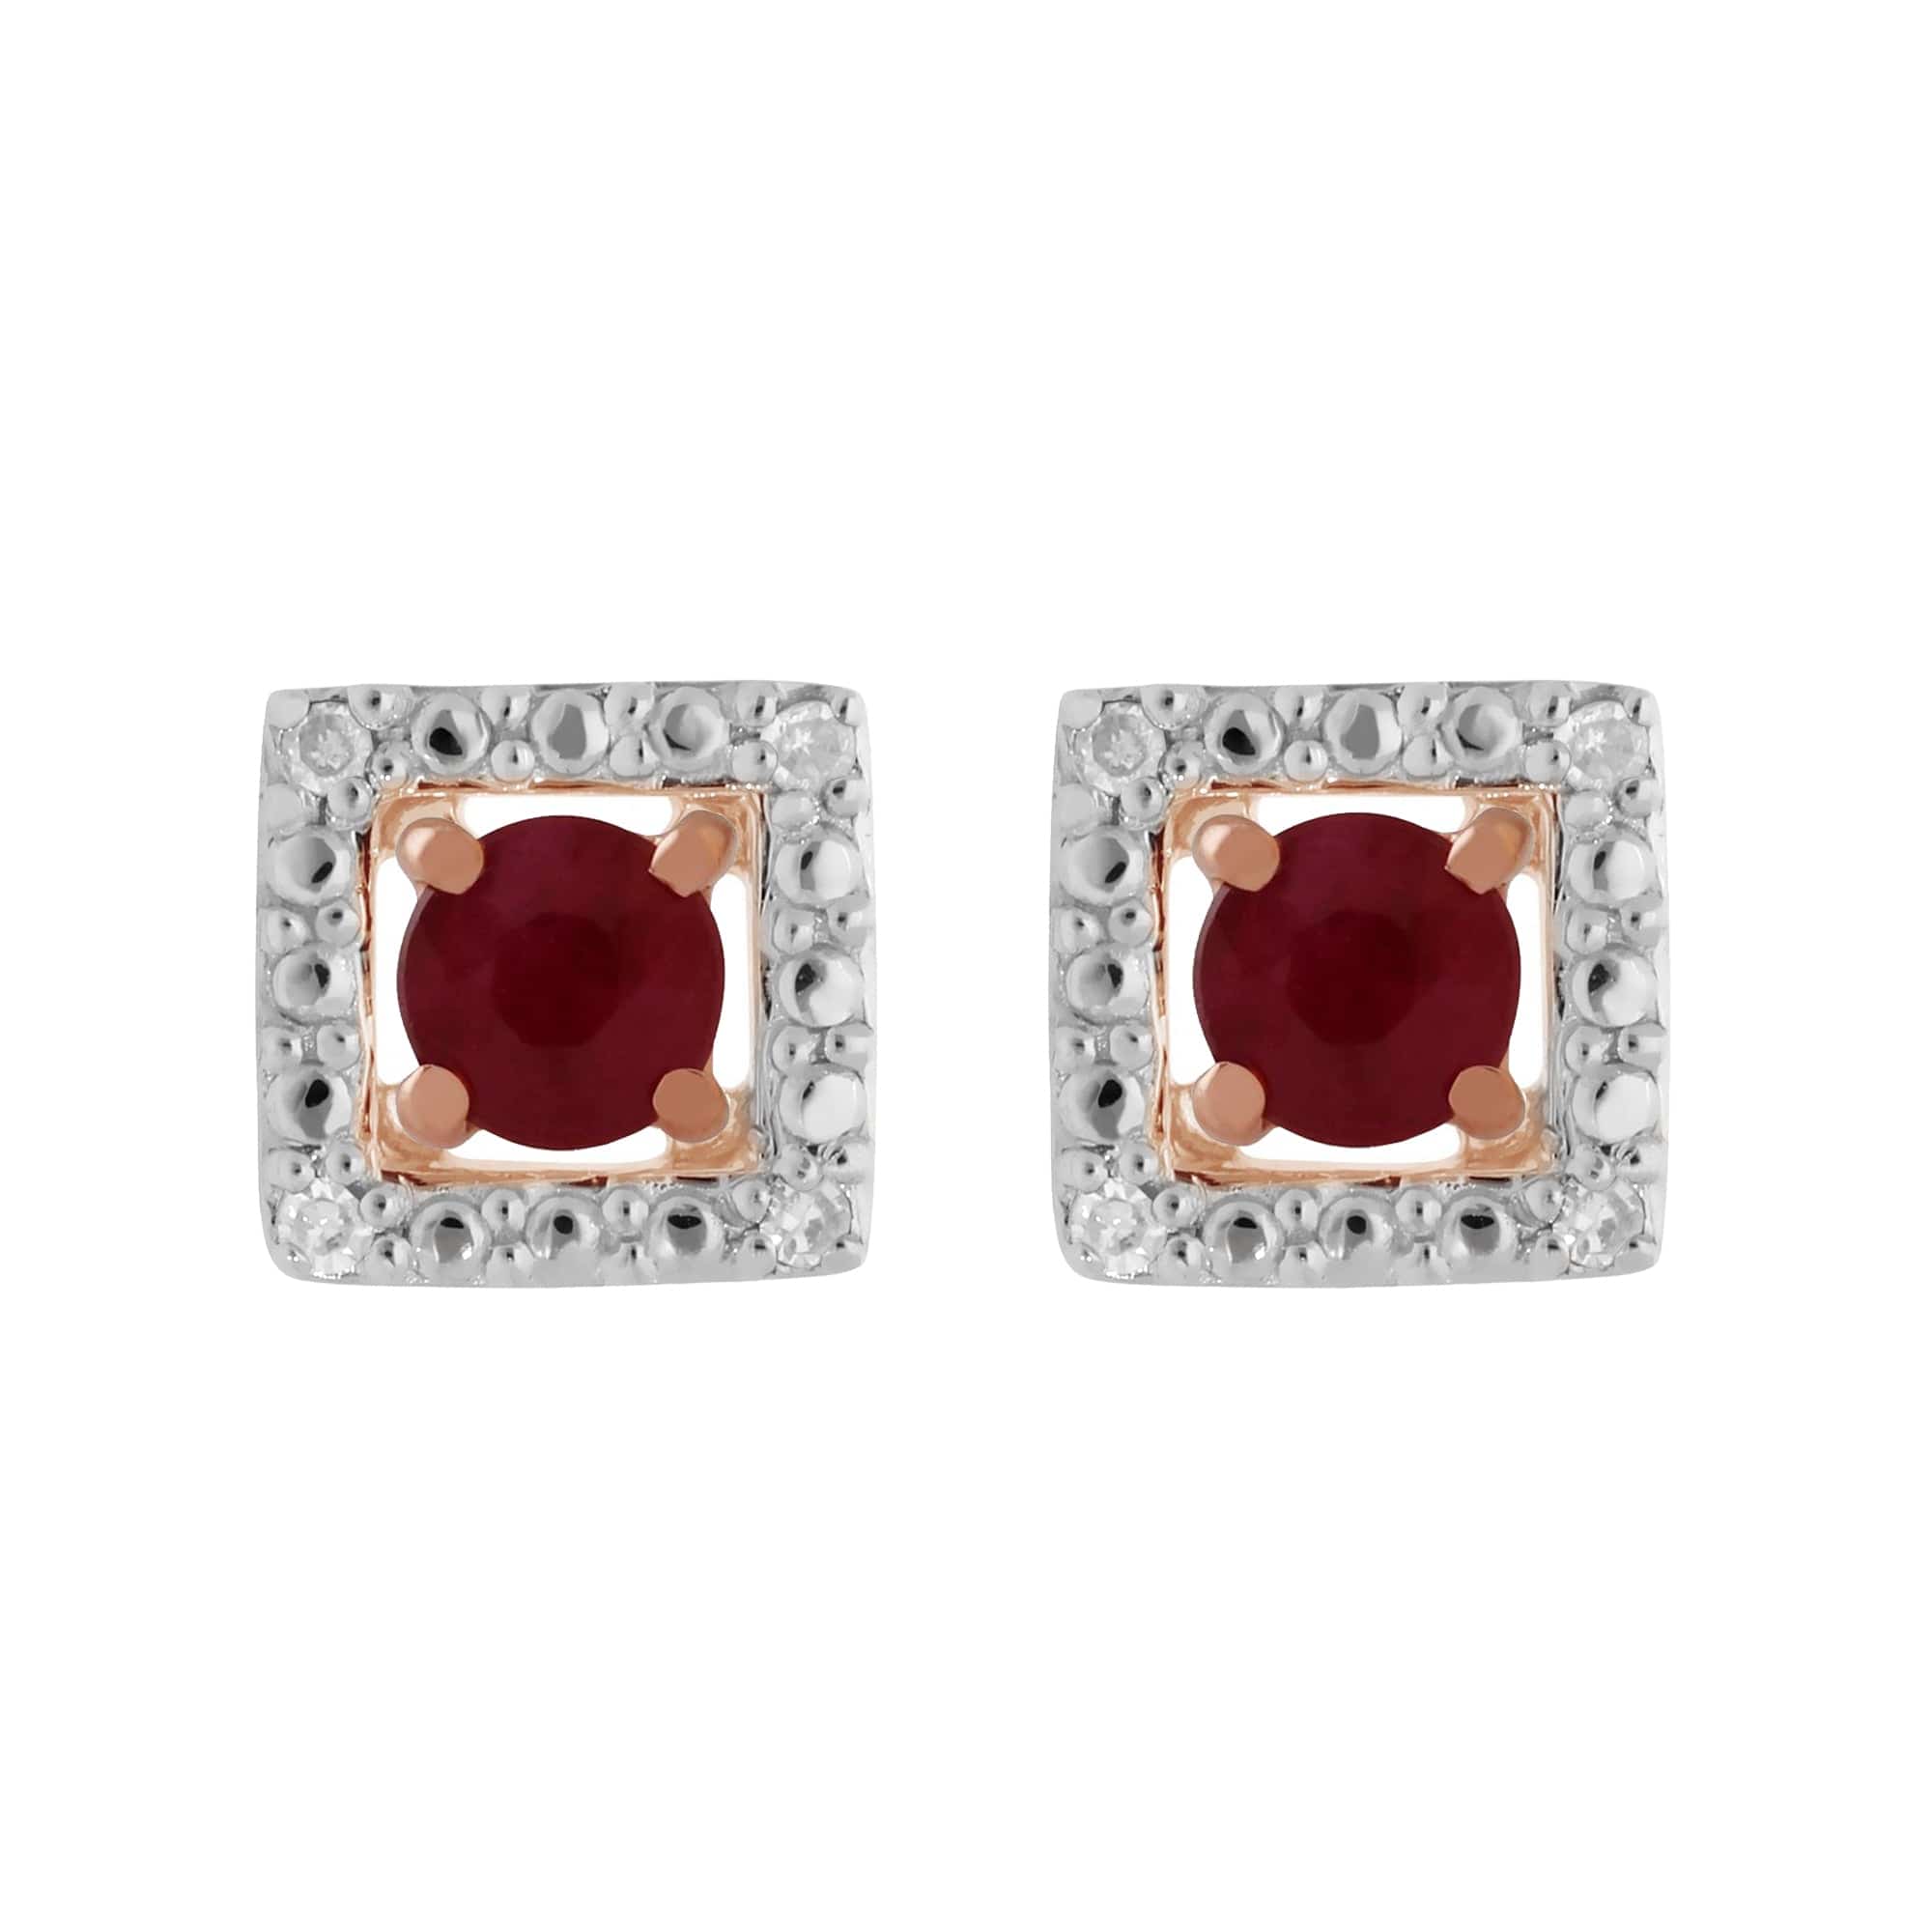 183E4316069-191E0380019 Classic Round Ruby Stud Earrings with Detachable Diamond Square Ear Jacket in 9ct Rose Gold 1